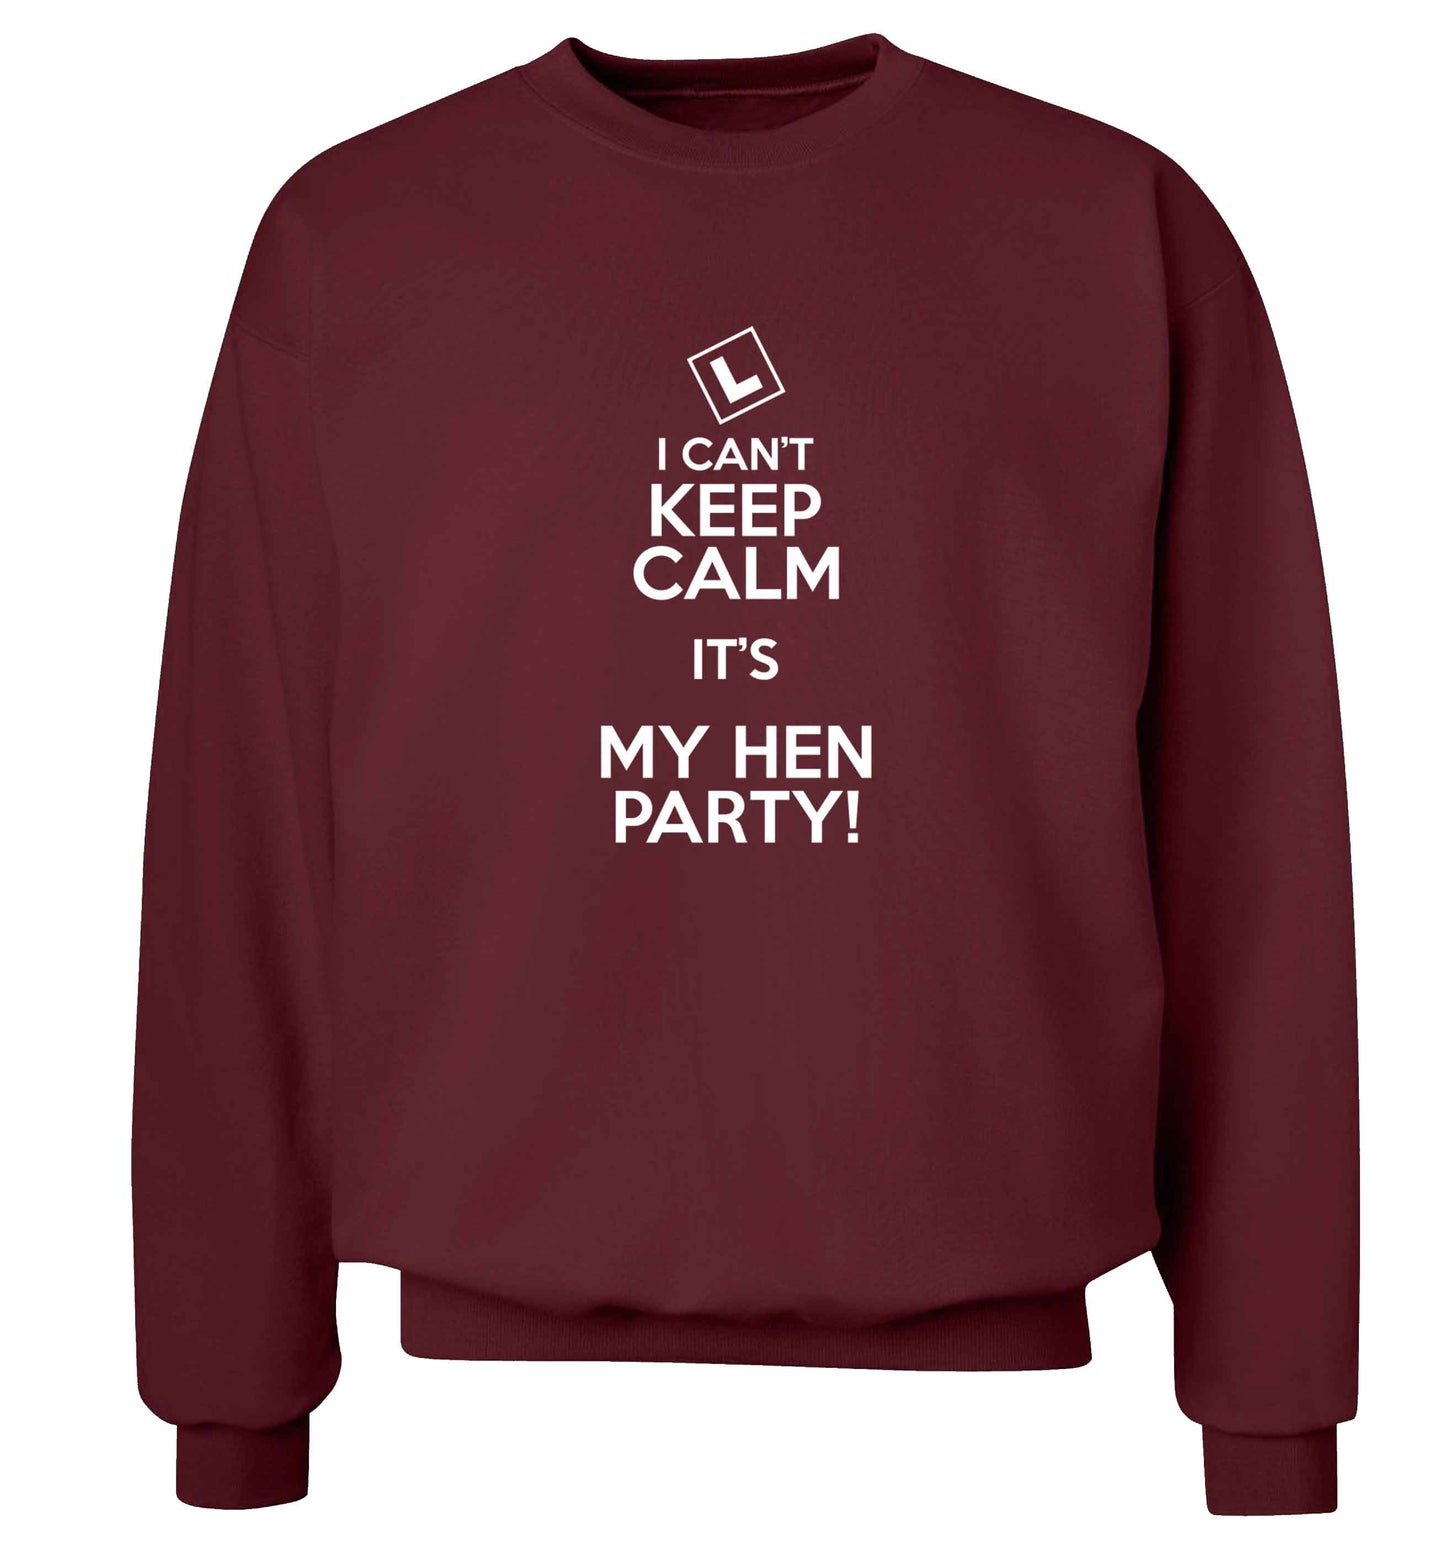 I can't keep calm it's my hen party adult's unisex maroon sweater 2XL